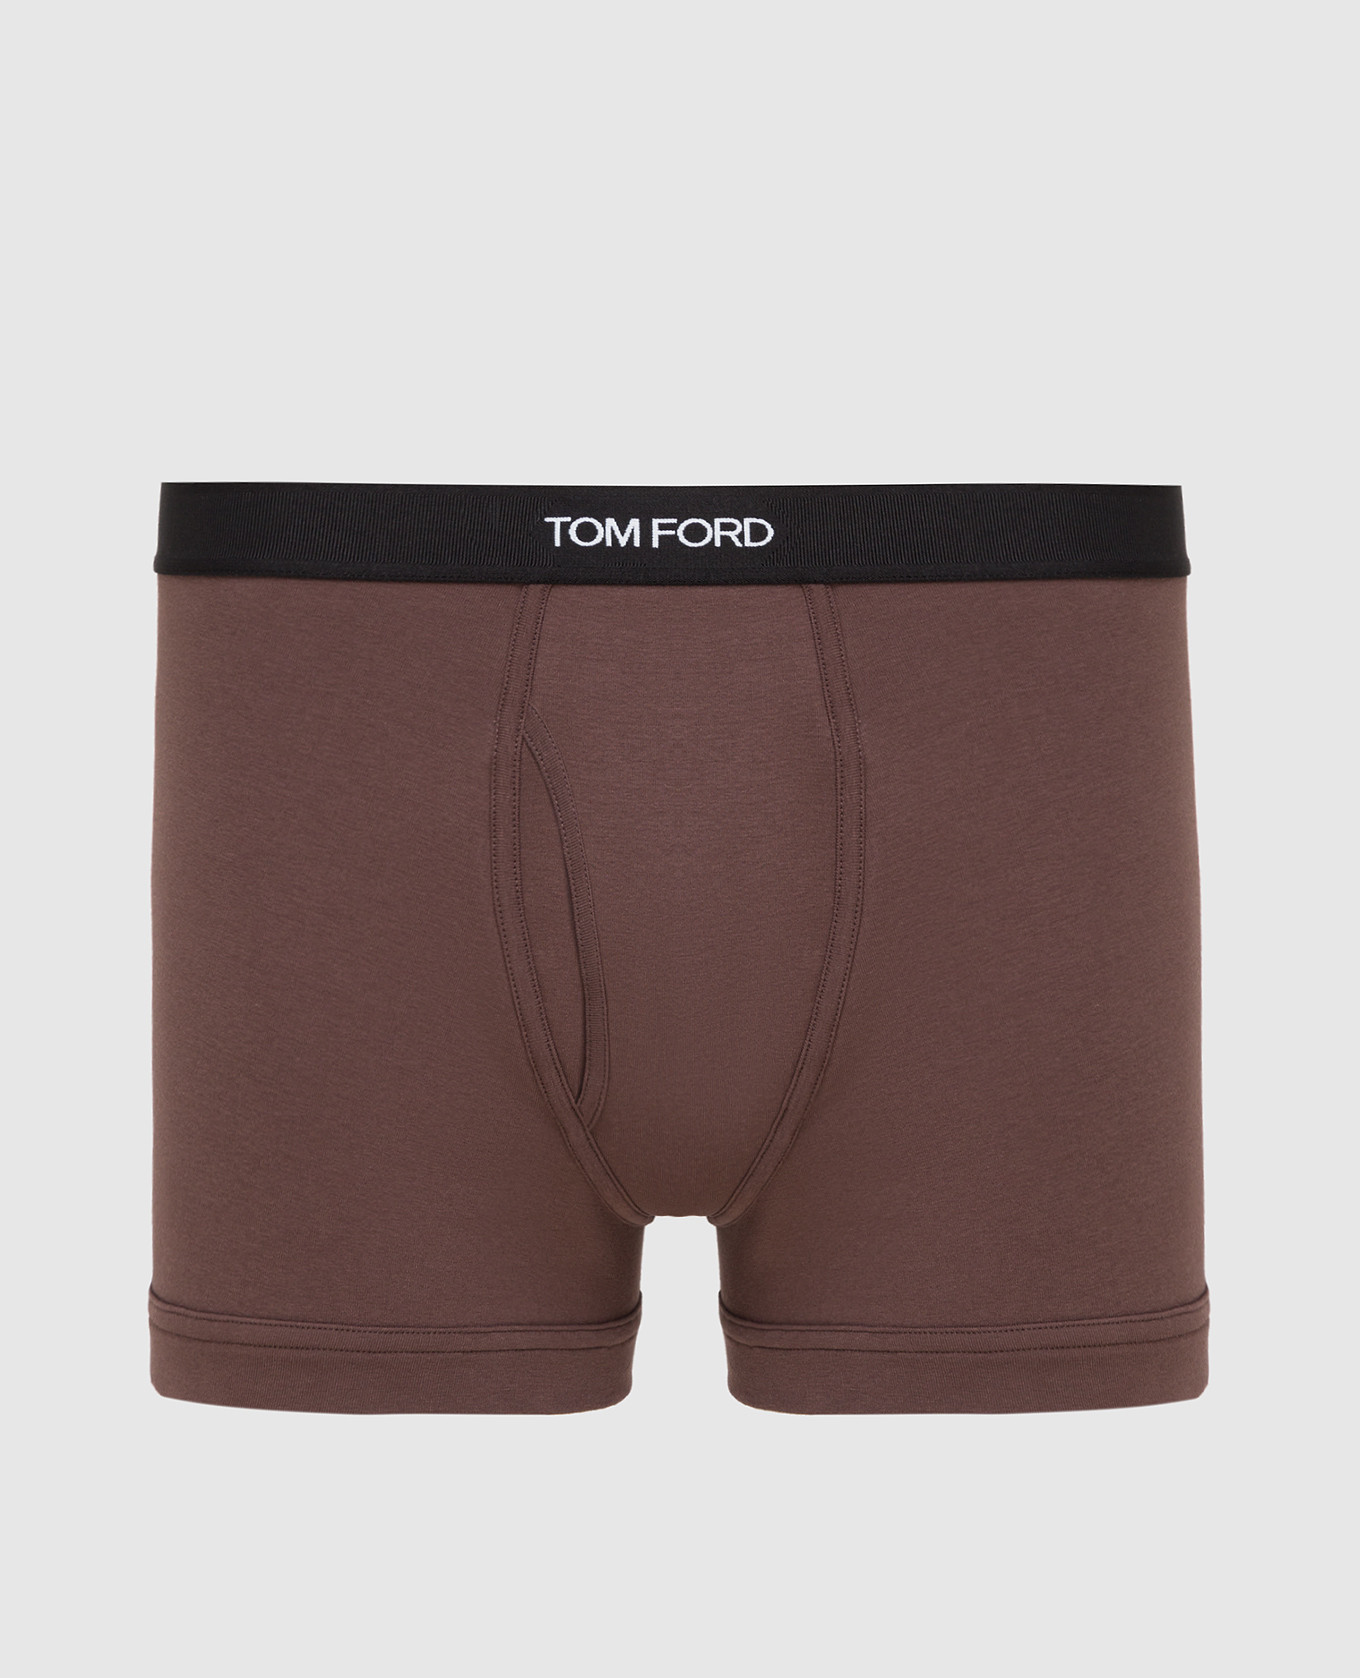 Tom Ford - Brown briefs T4LC30040 buy at Symbol